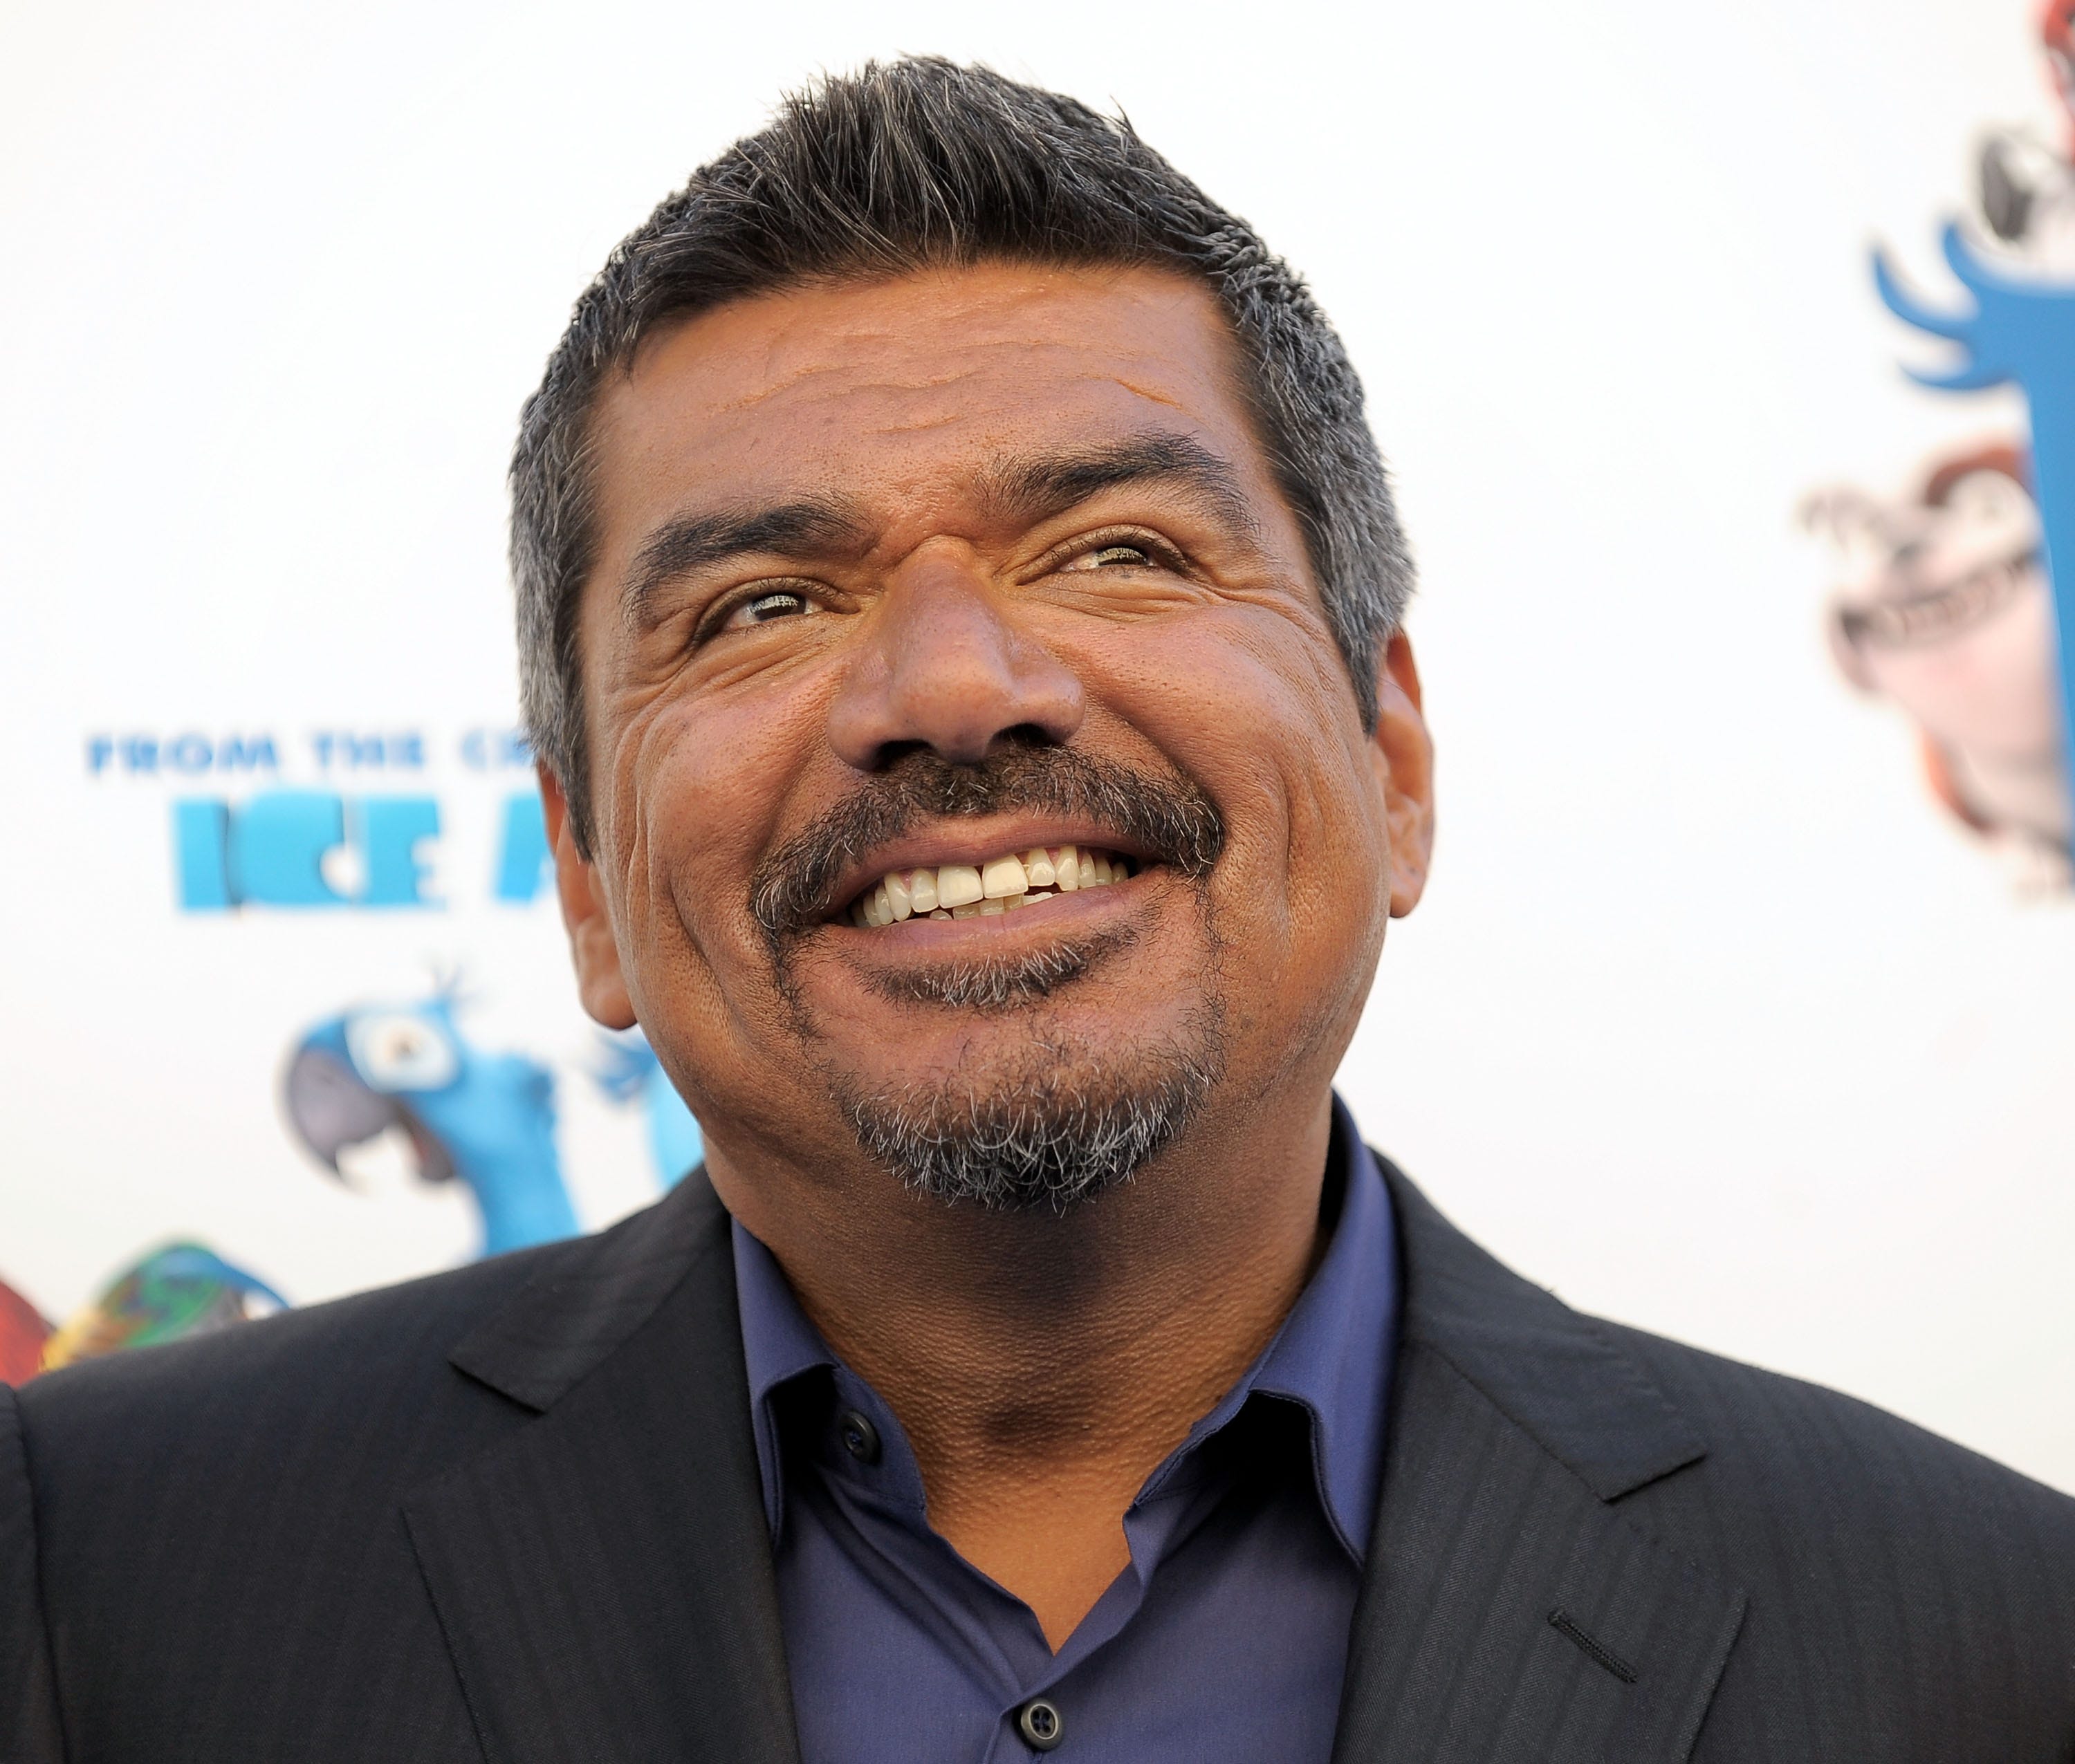 DCU - The Direct on X: BREAKING: Comedian George Lopez has been